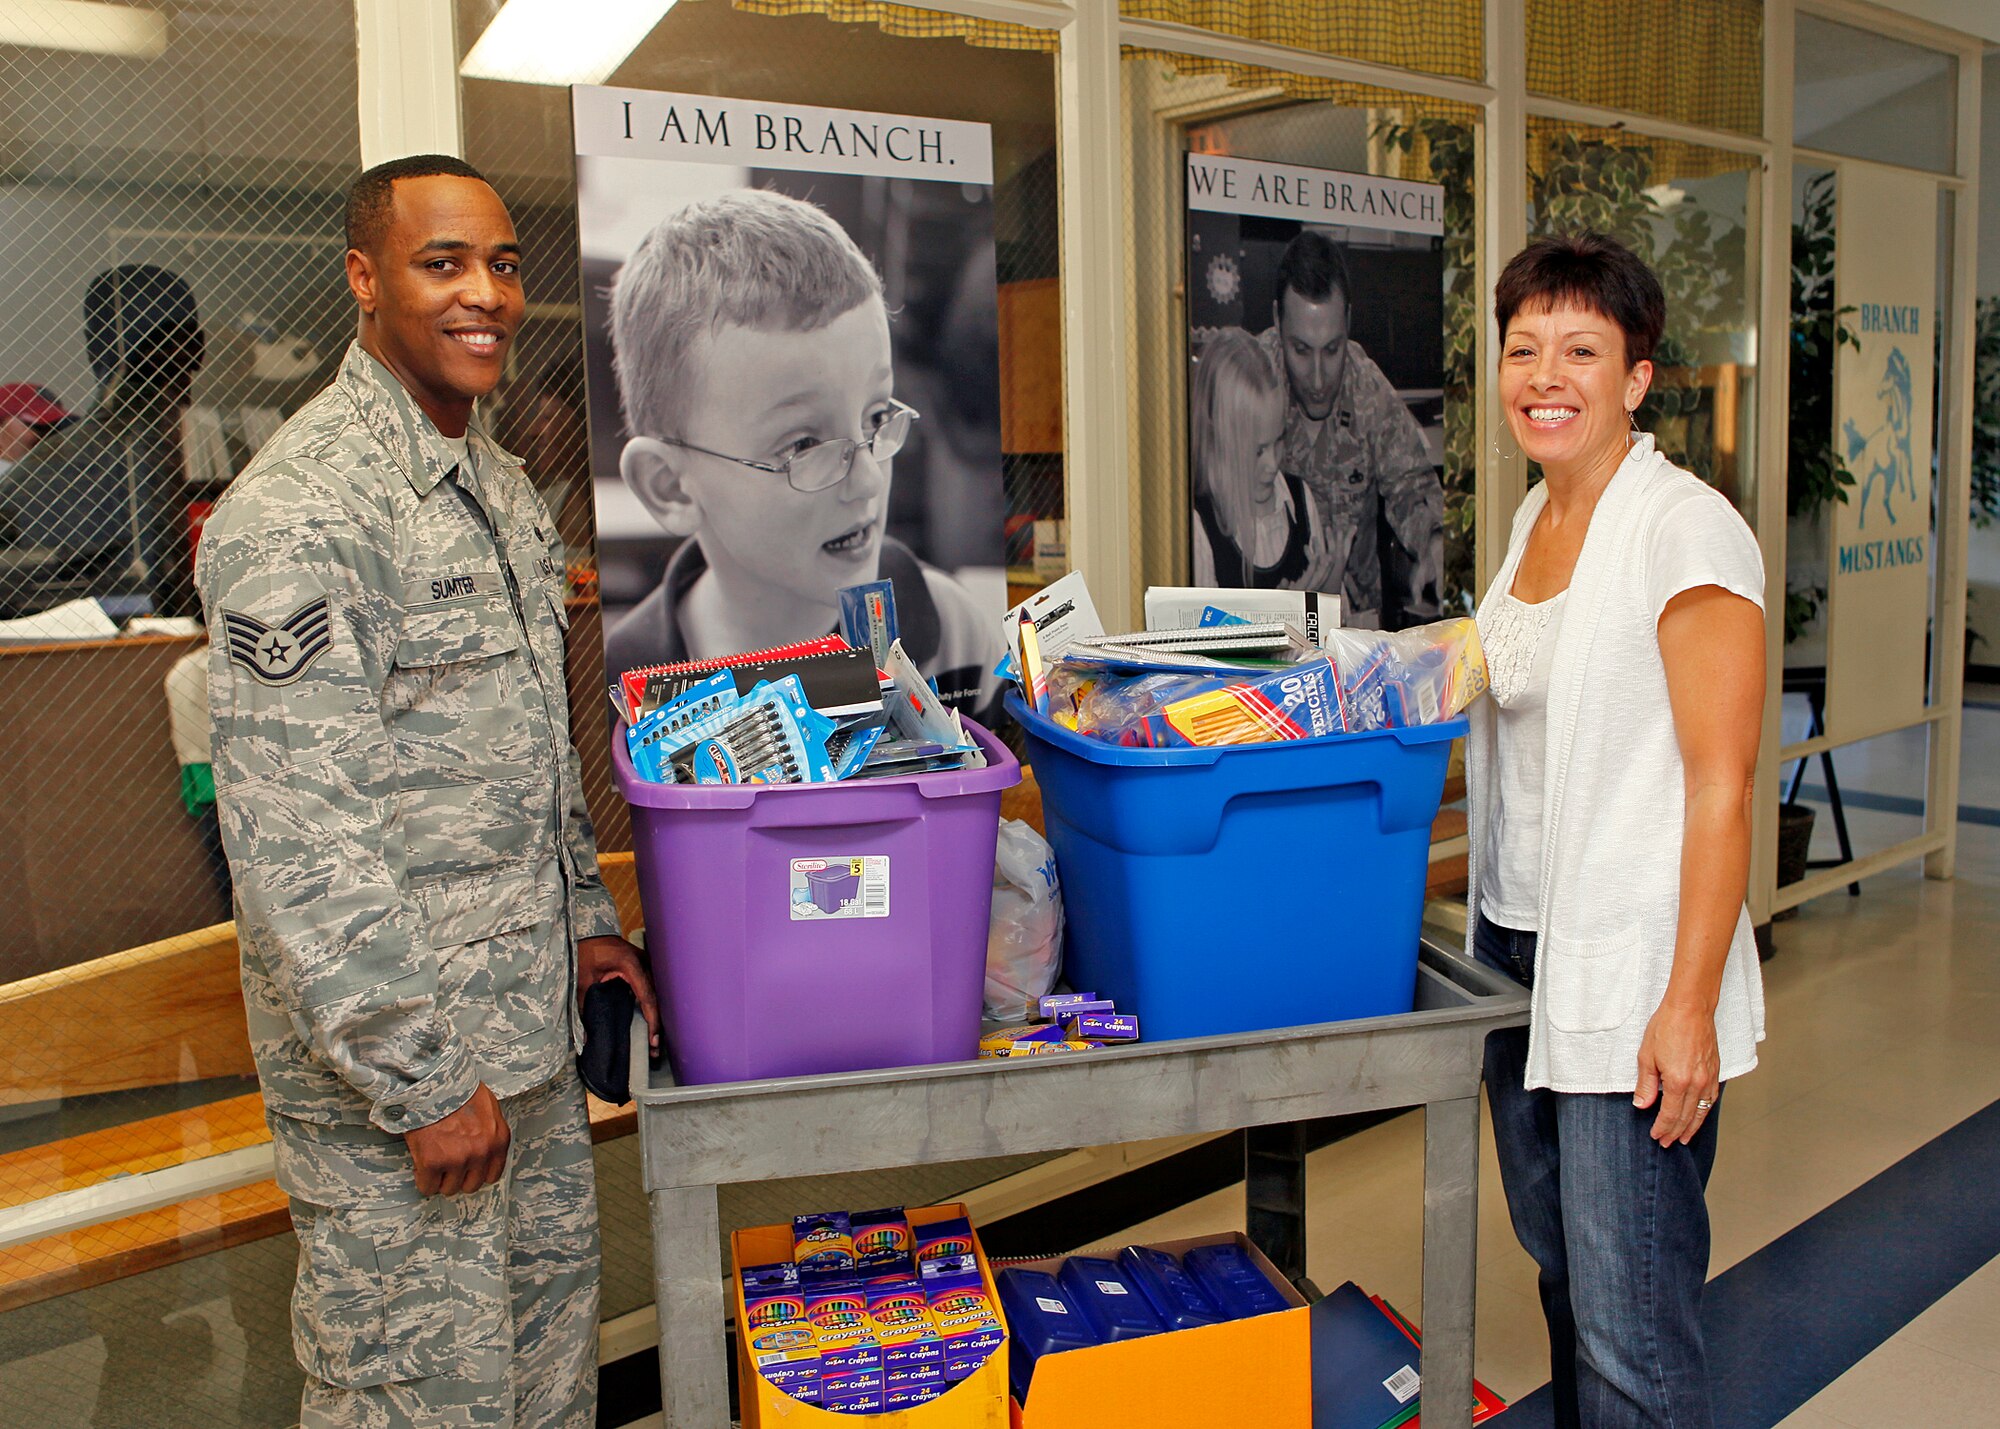 Staff Sgt. Devon Sumter, 412th Security Forces Squadron Pass and Identification clerk, and Ms. Kathleen Wilson, Irving L. Branch Elementary School principal, pose for a picture after Sergeant Sumter donated more than 200 school supply items to Irving L. Branch Elementary School Sep. 7, 2012. Ms. Wilson accepted the donations on behalf of the school. (U.S. Air Force photo by Jet Fabara)